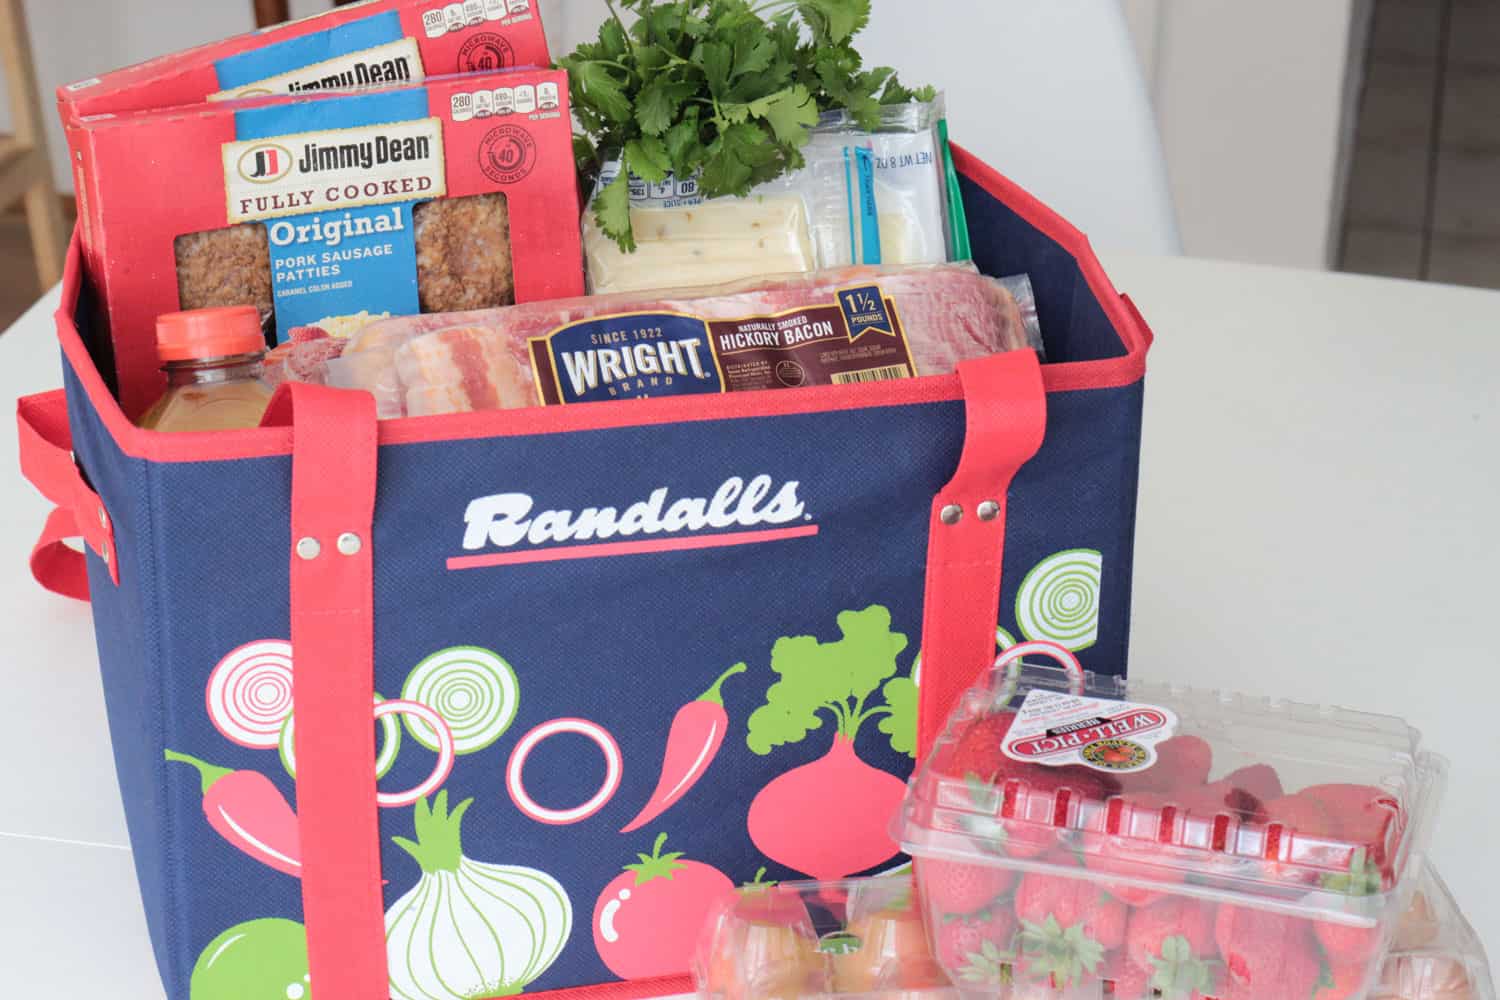 Randall's reusable grocery tote with Wright brand bacon, Jimmy Dean sausage, cheese and cilantro in it.